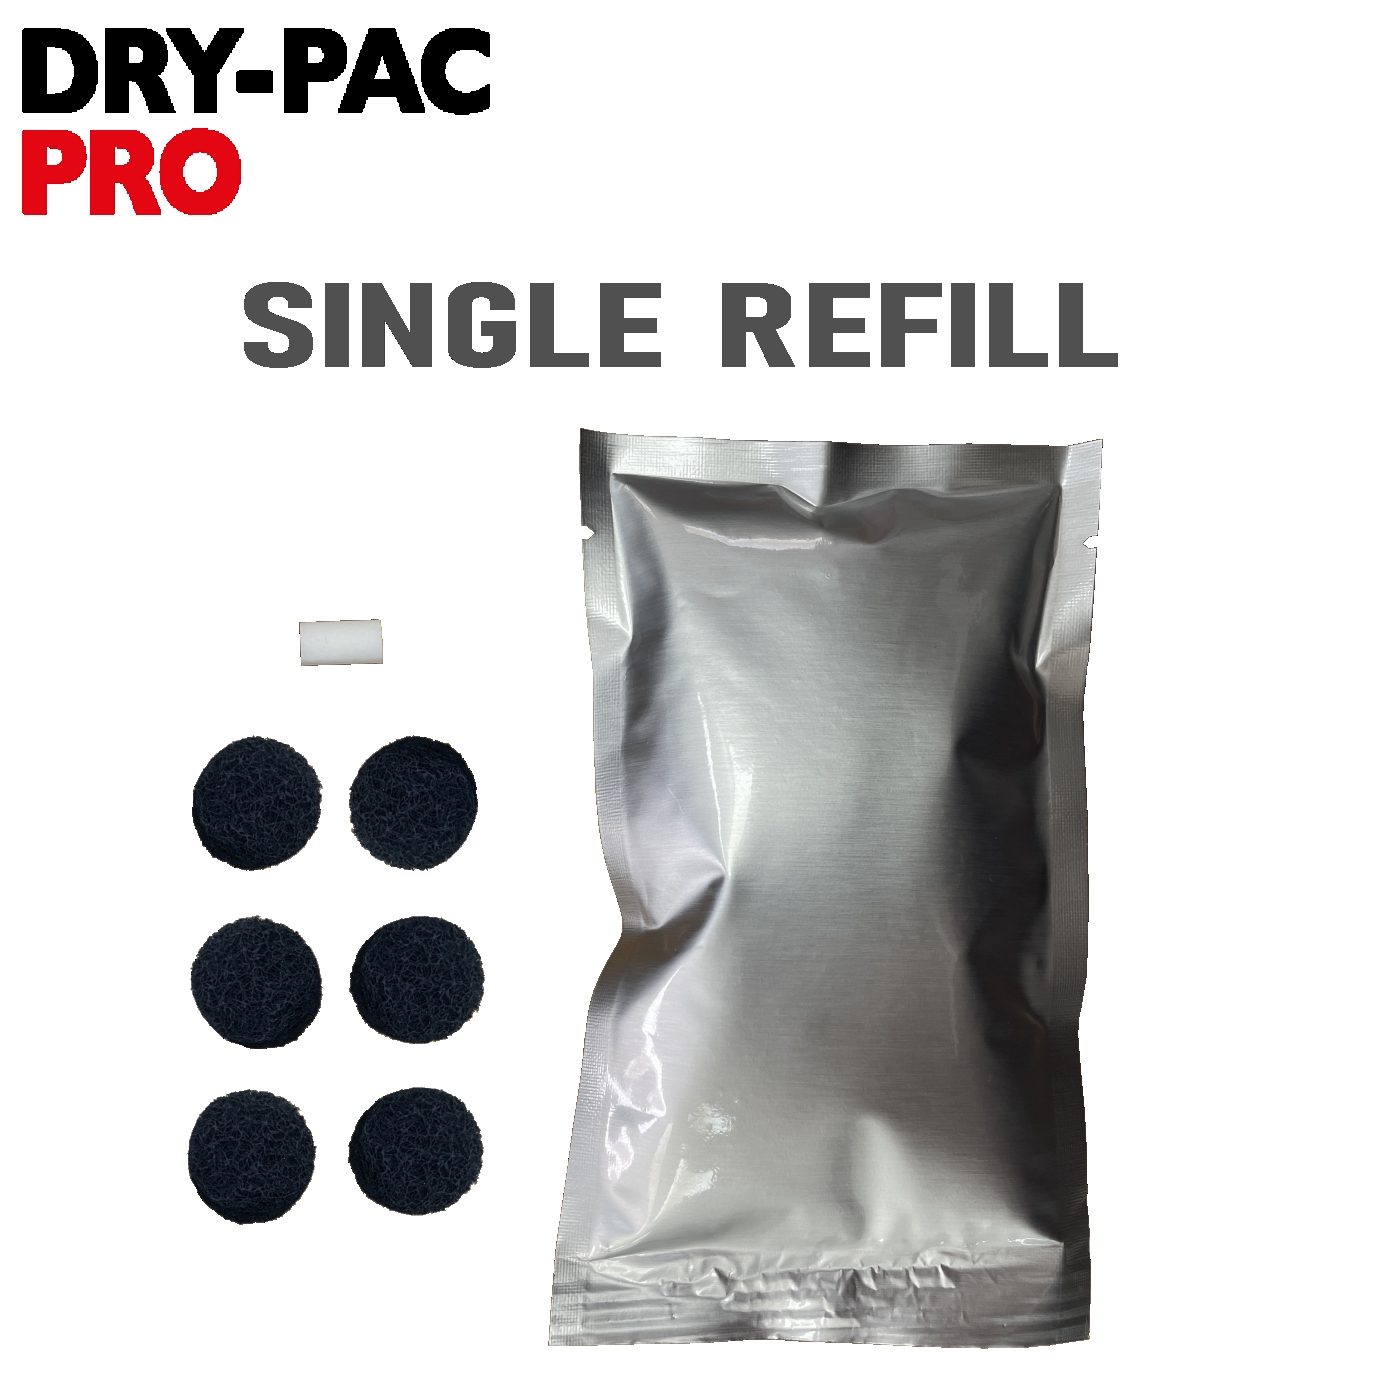 Dry-Pac Pro Refill / Seal Kits